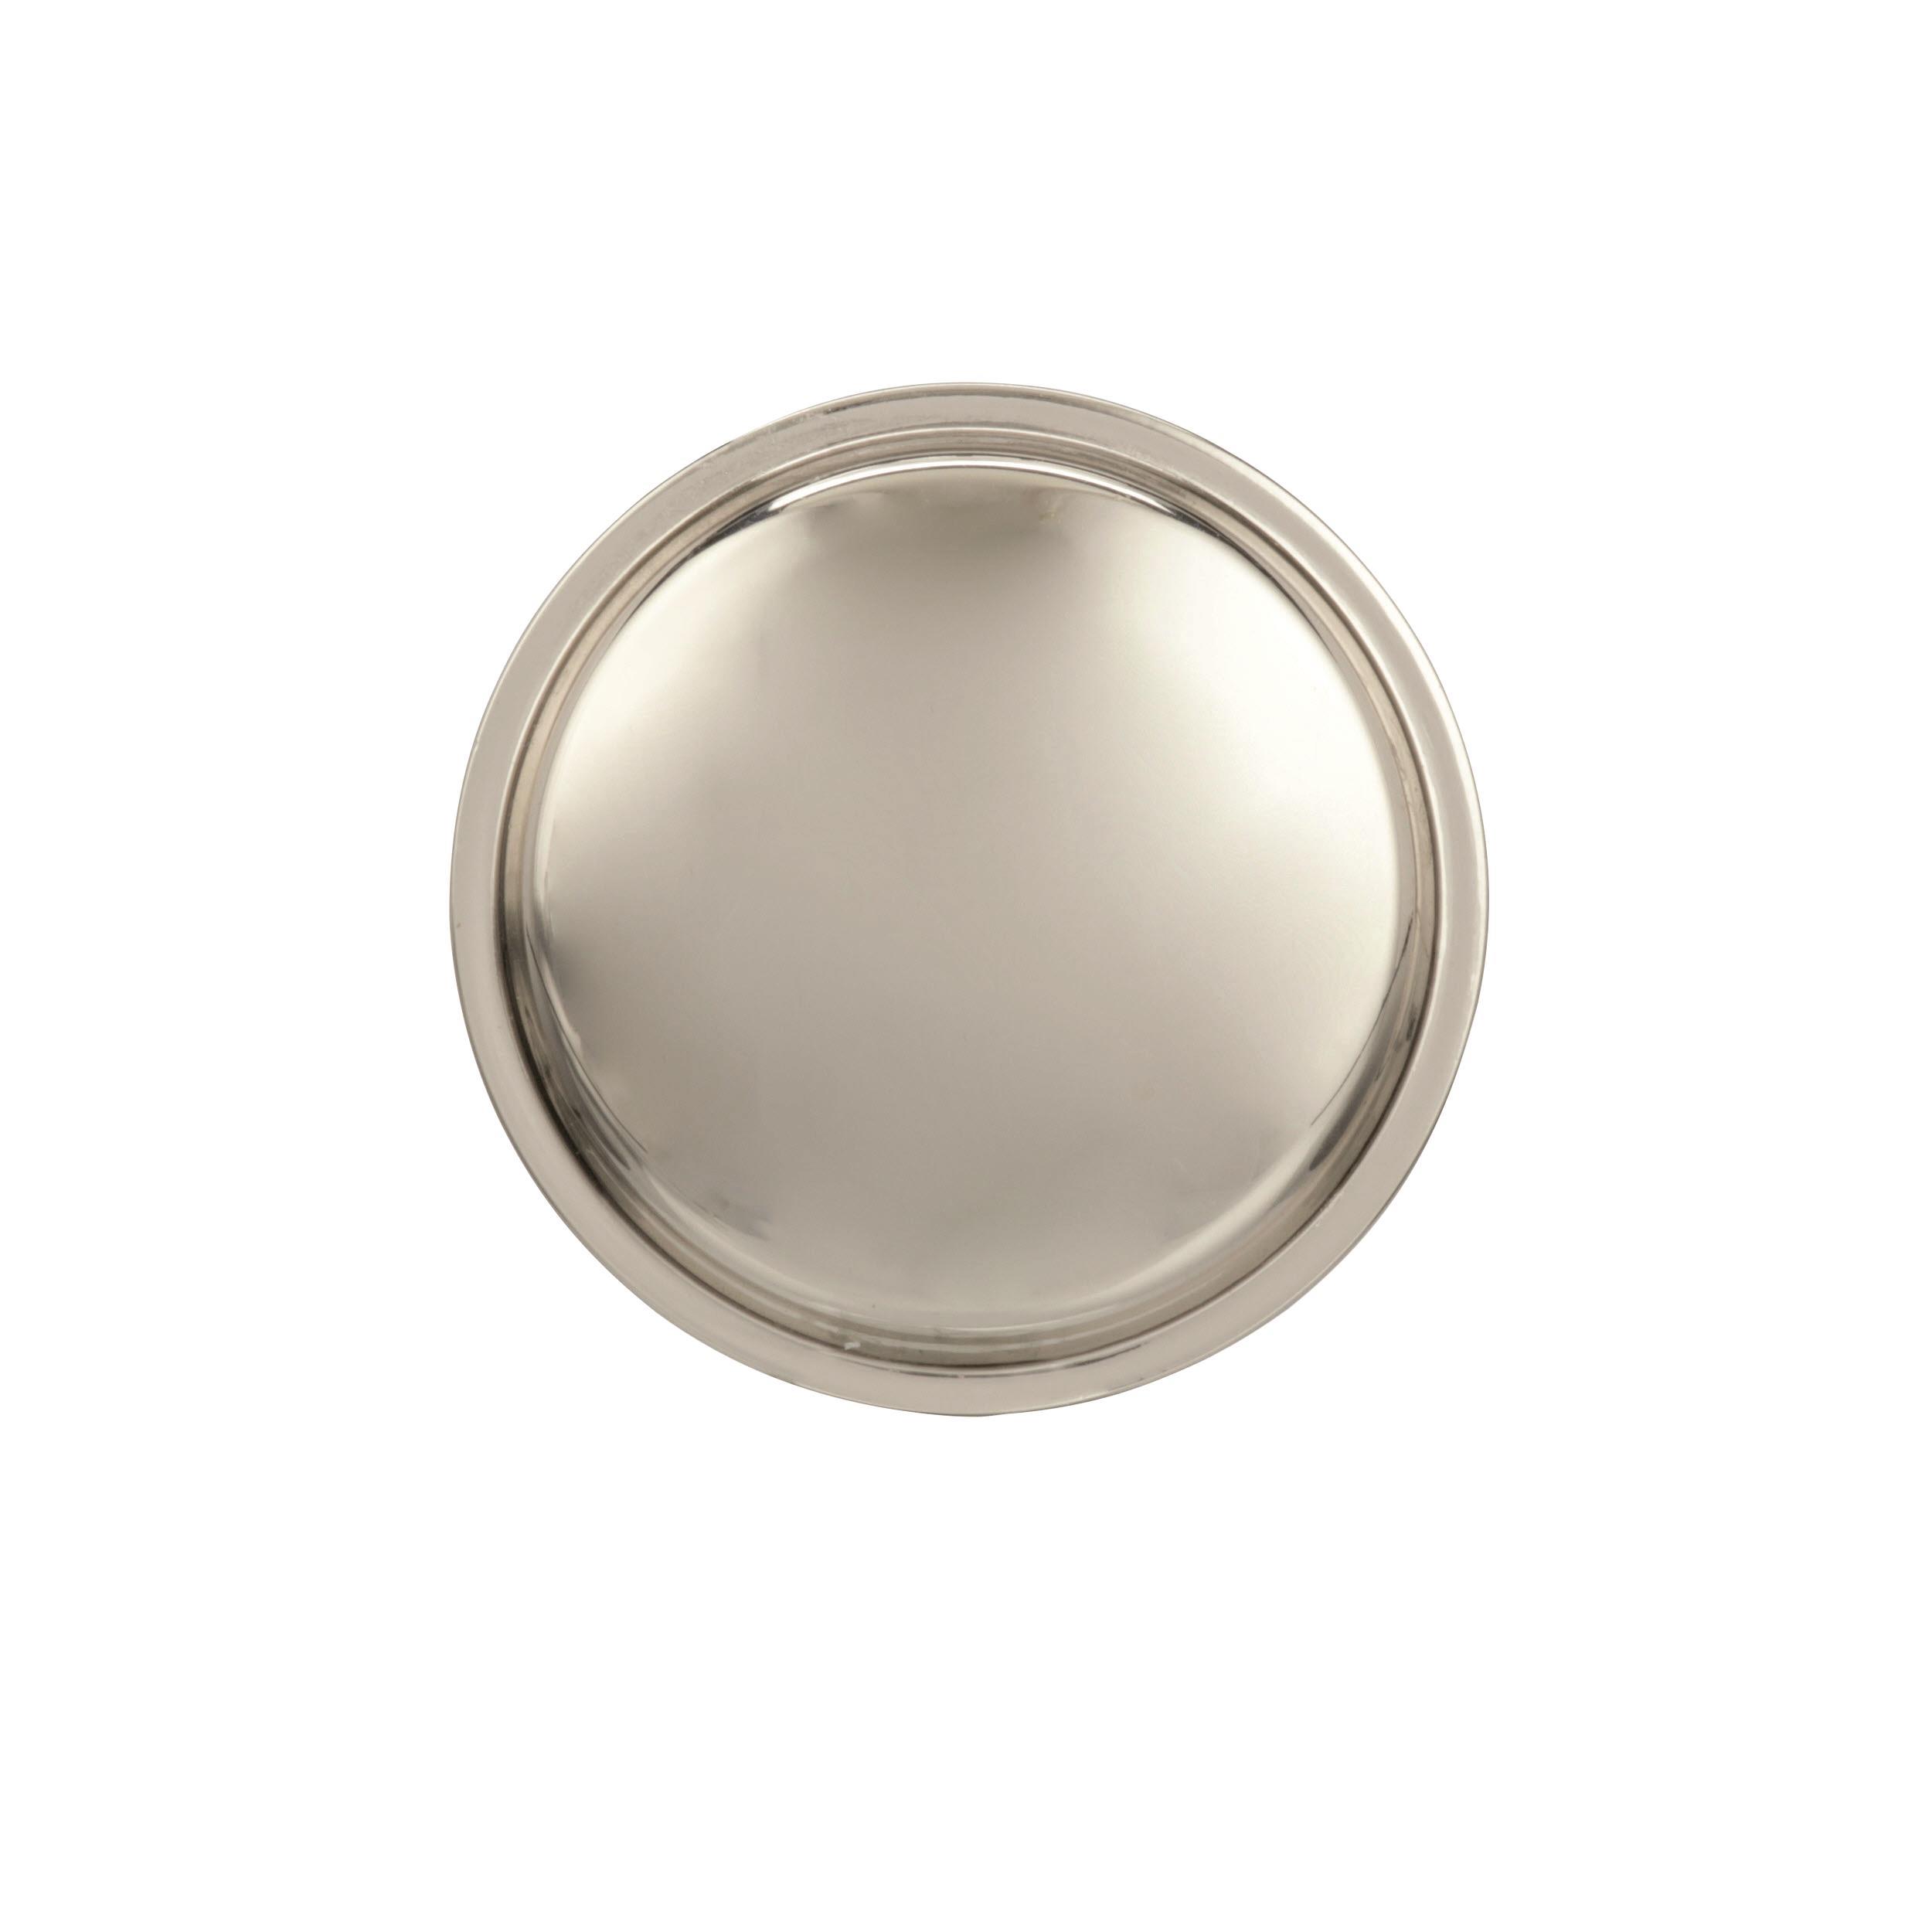 Westerly Round Knob, 1-3/16 in (30 mm), Polished Nickel